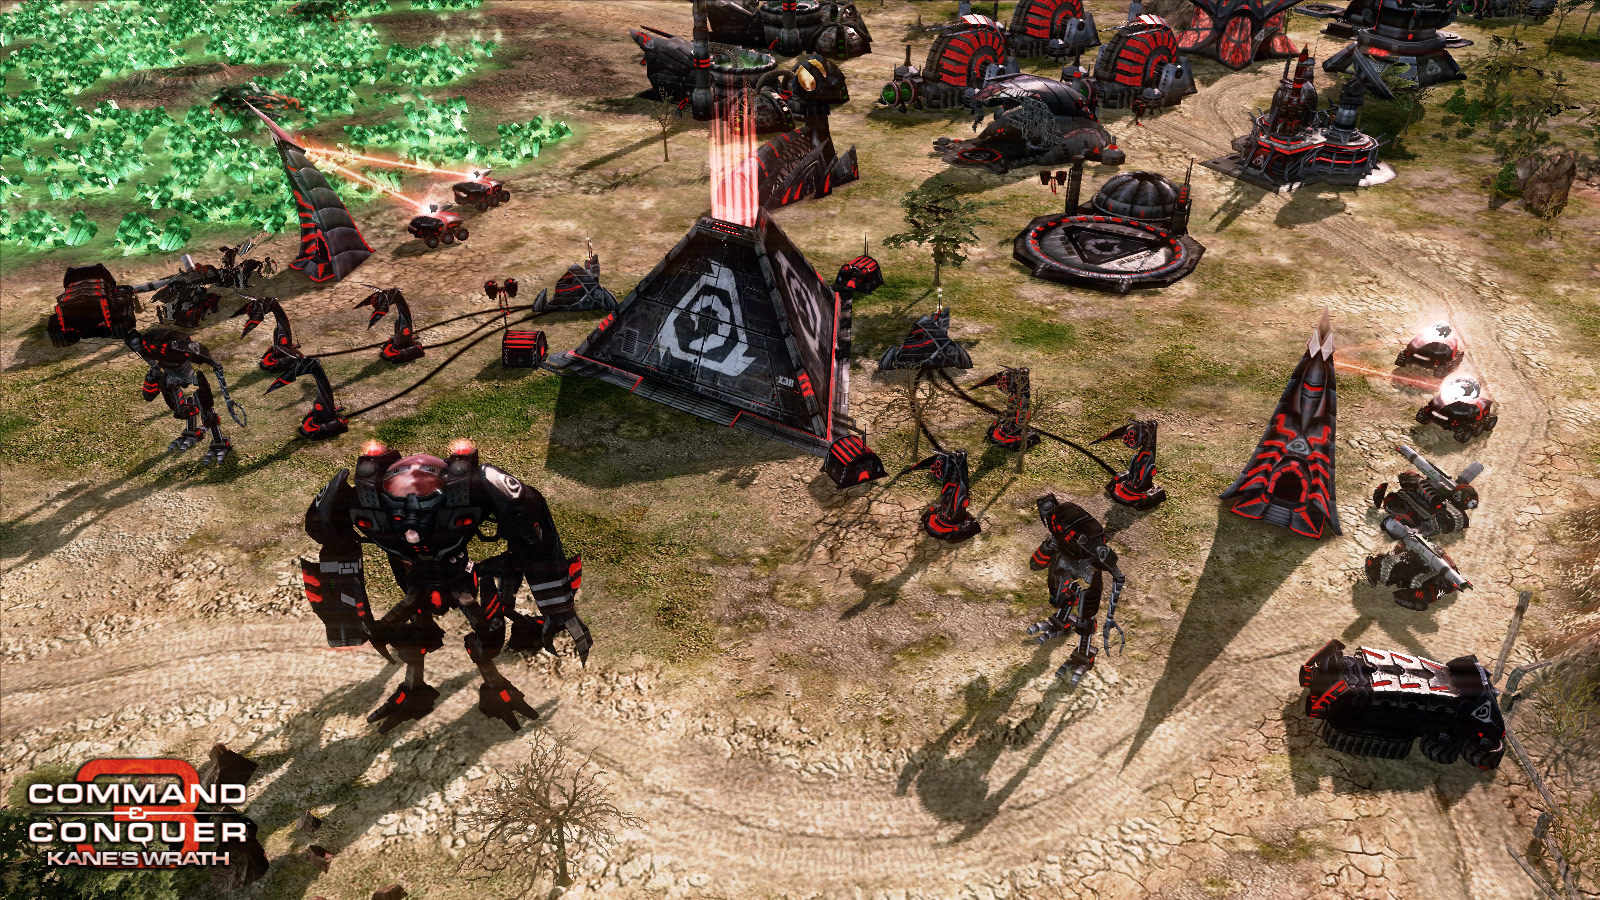 Funds Soar lotus Save 75% on Command & Conquer 3: Kane's Wrath on Steam